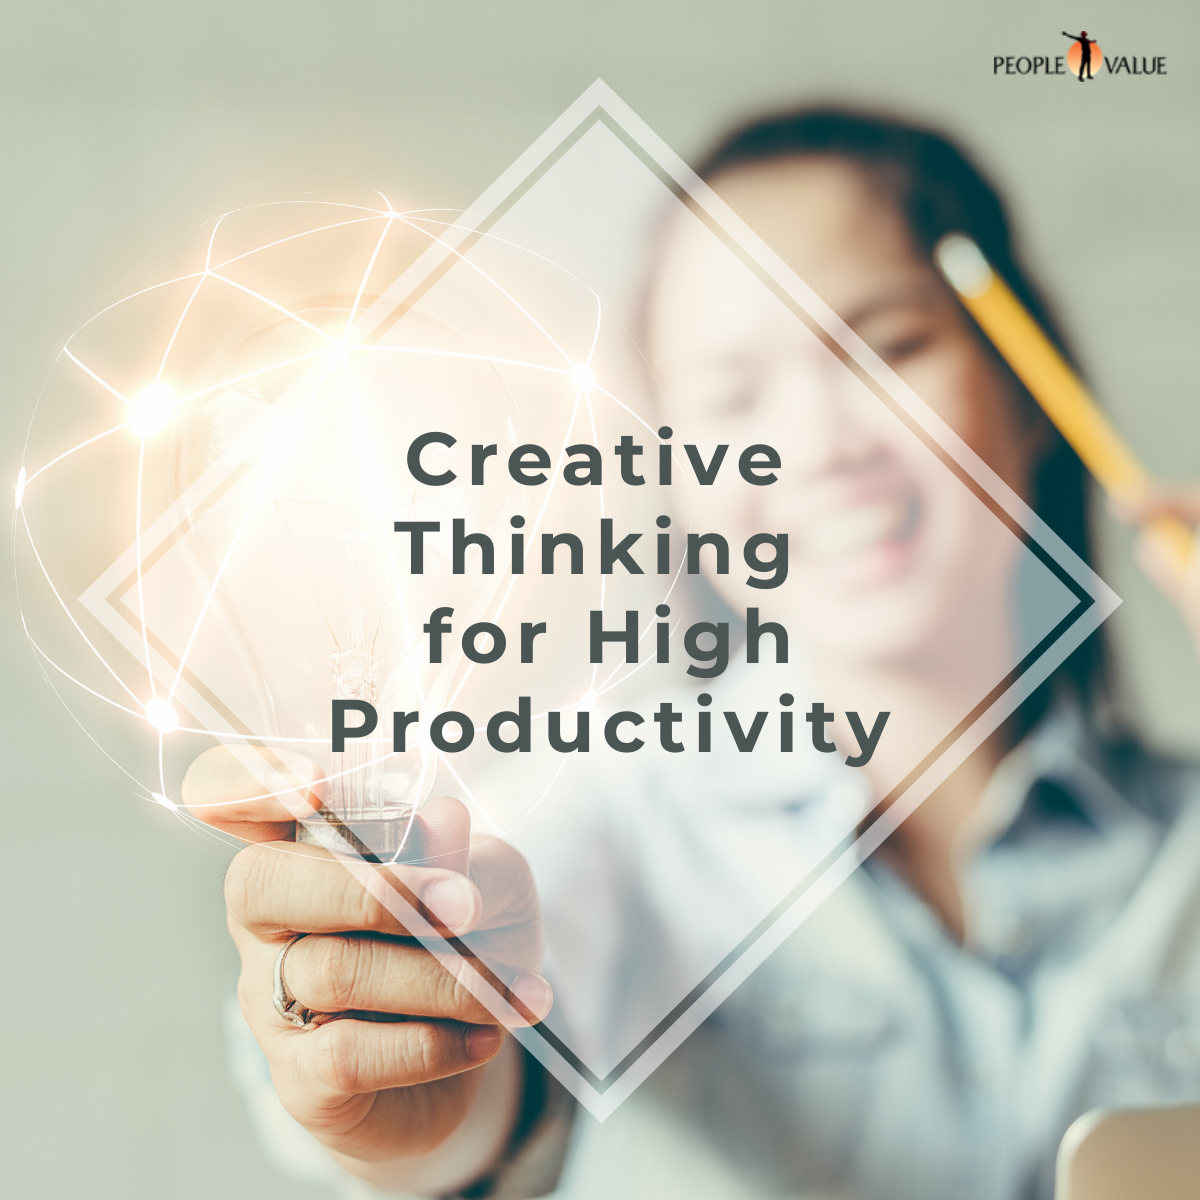 Creative Thinking for High Productivity